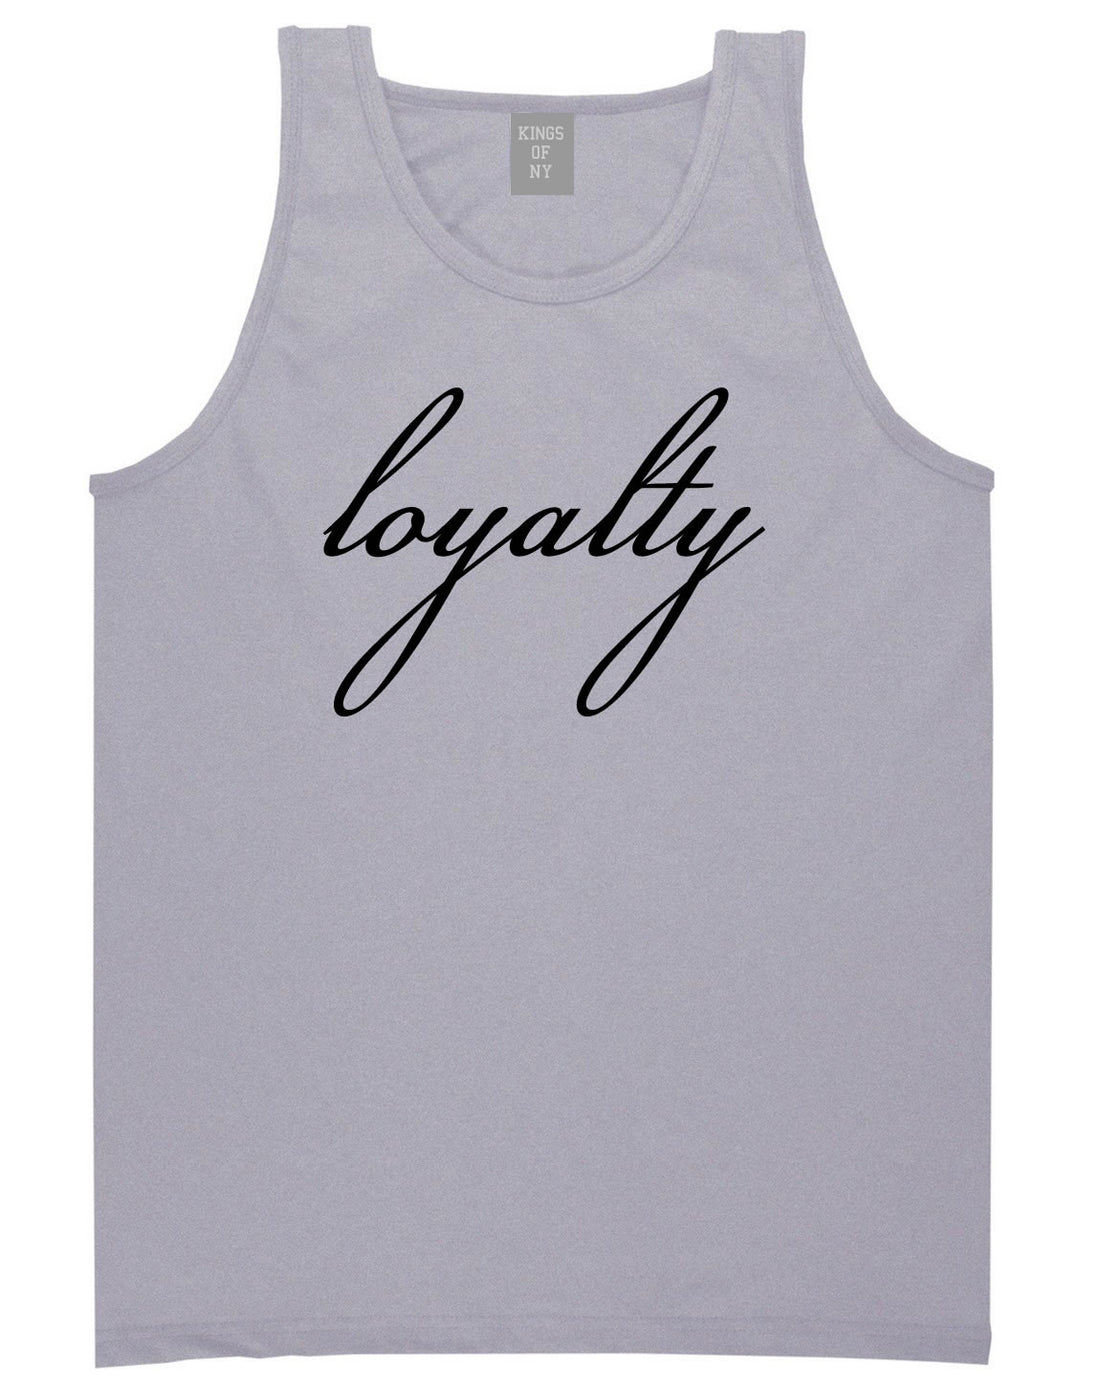 Loyalty Respect Aint New York Hoes Tank Top In Grey by Kings Of NY